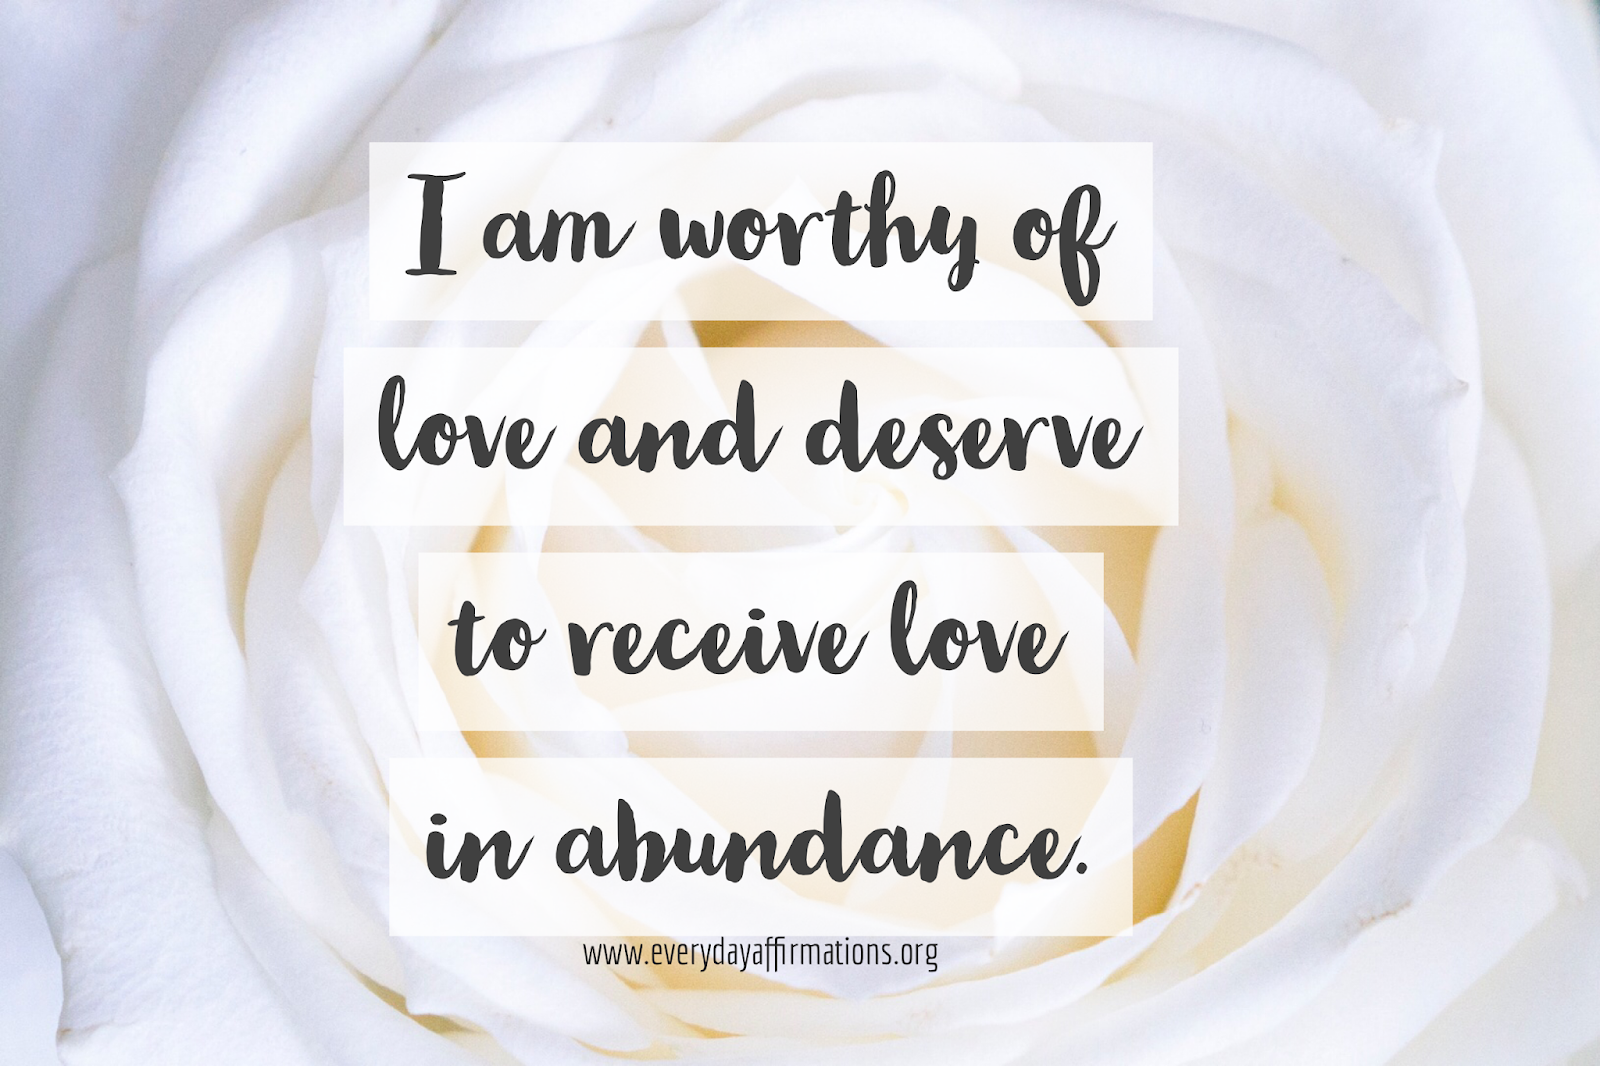 Daily Affirmations - 2 February 2020